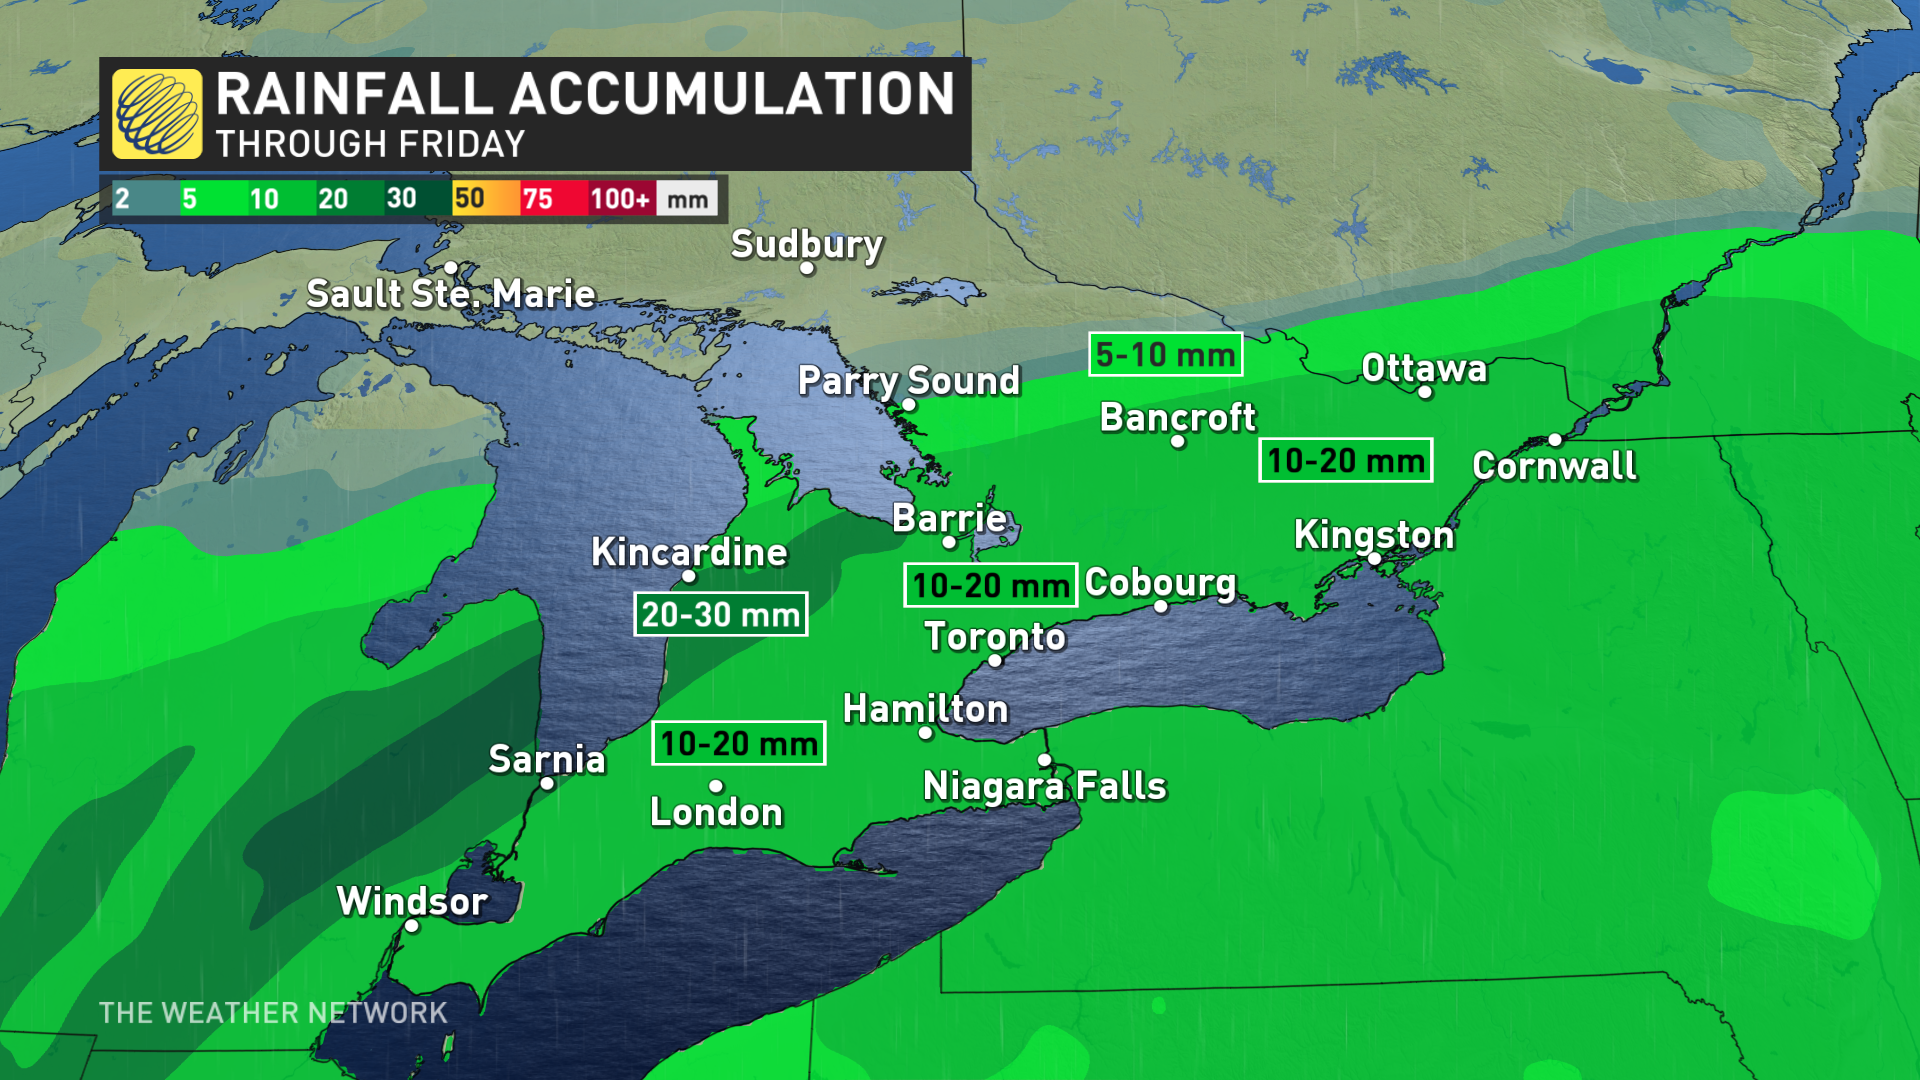 southern ontario stuck in a multi-day fog, again, with more heavy rain coming